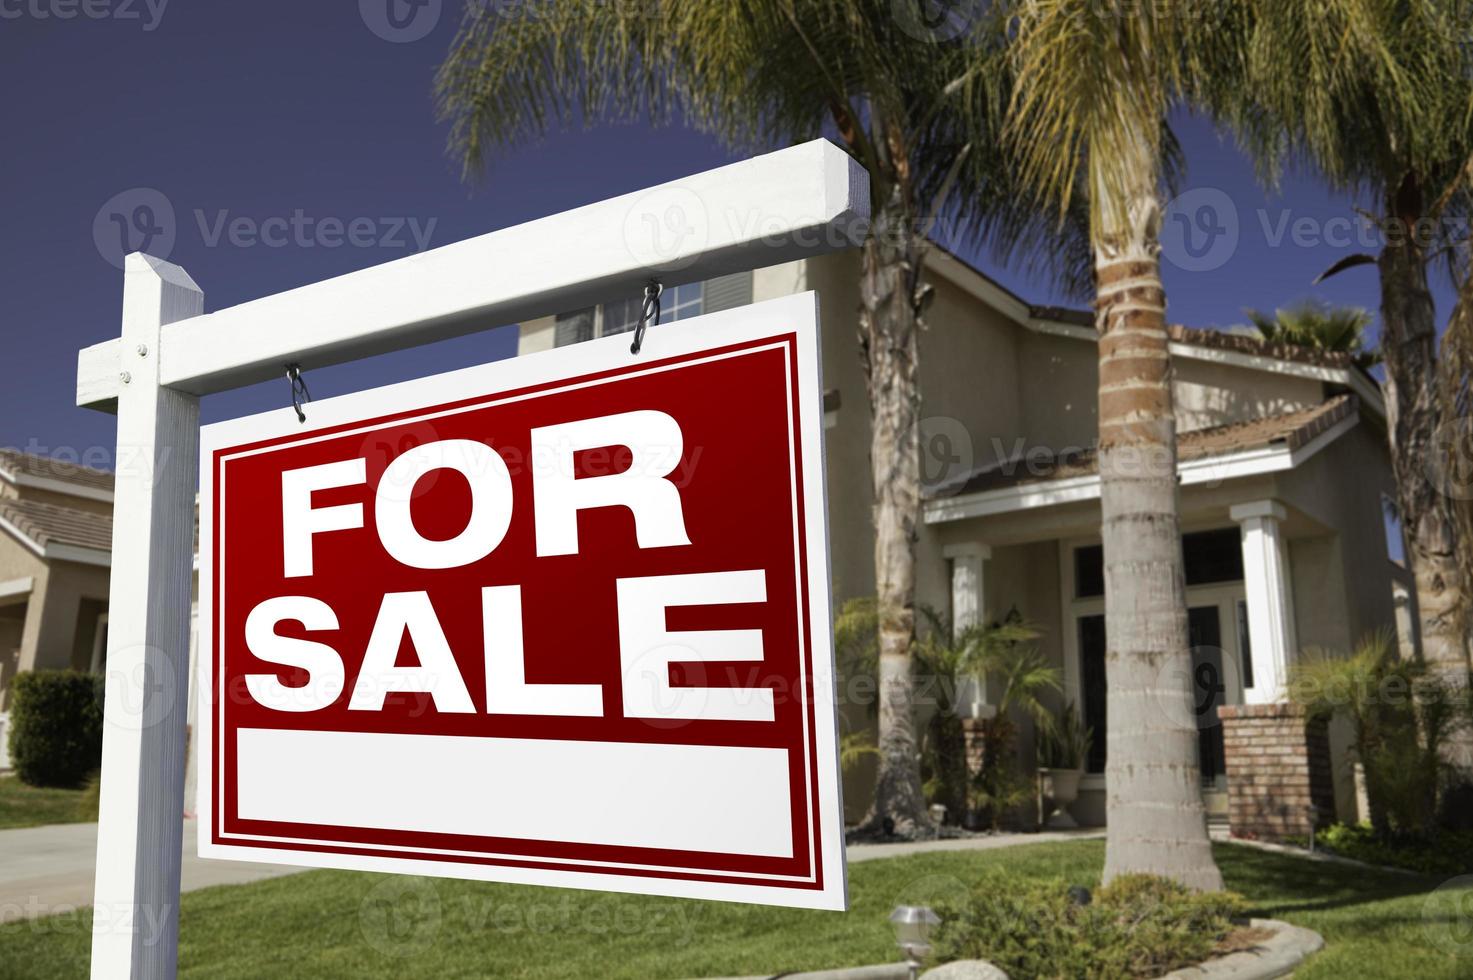 For Sale Real Estate Sign and House photo